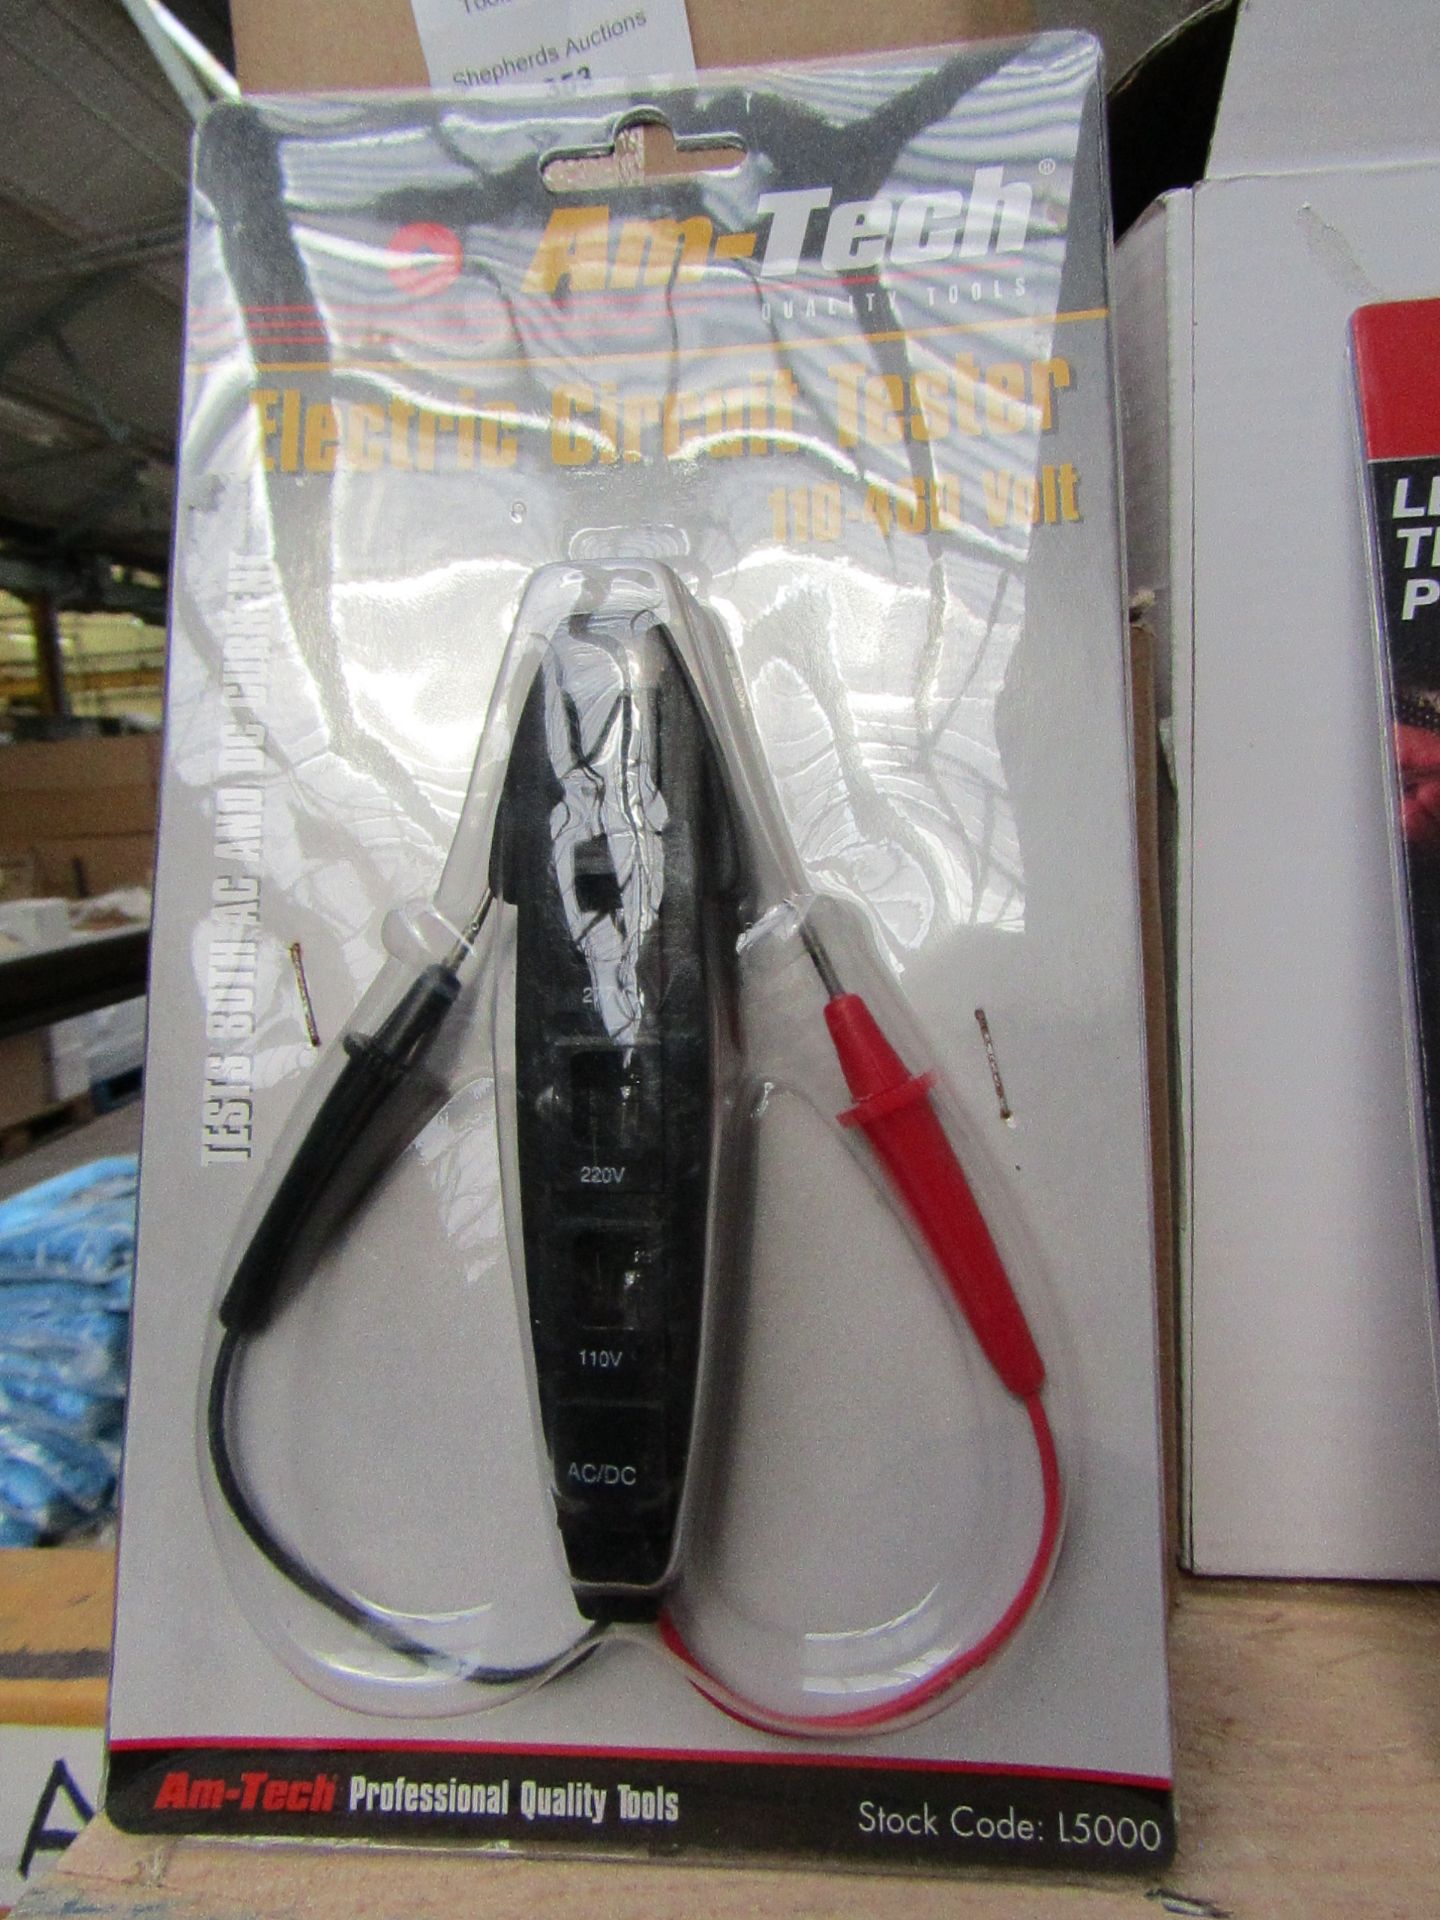 AM-Tech Electric Circuit Tester 110-460 Volt. New in Packaging